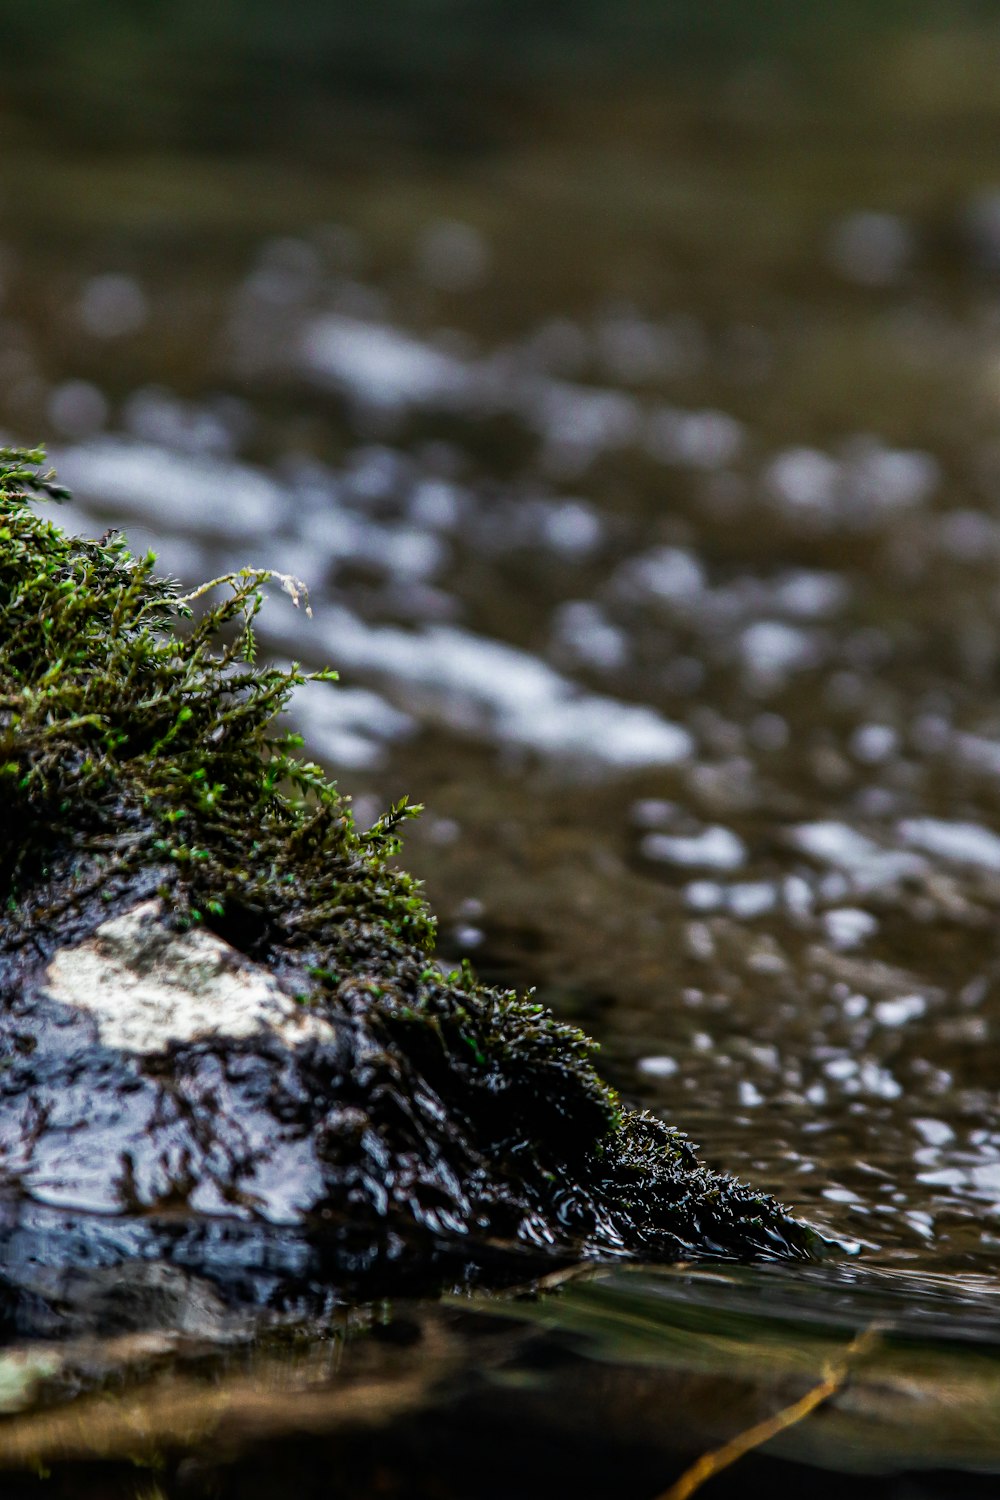 a close up of moss growing on a rock in the water